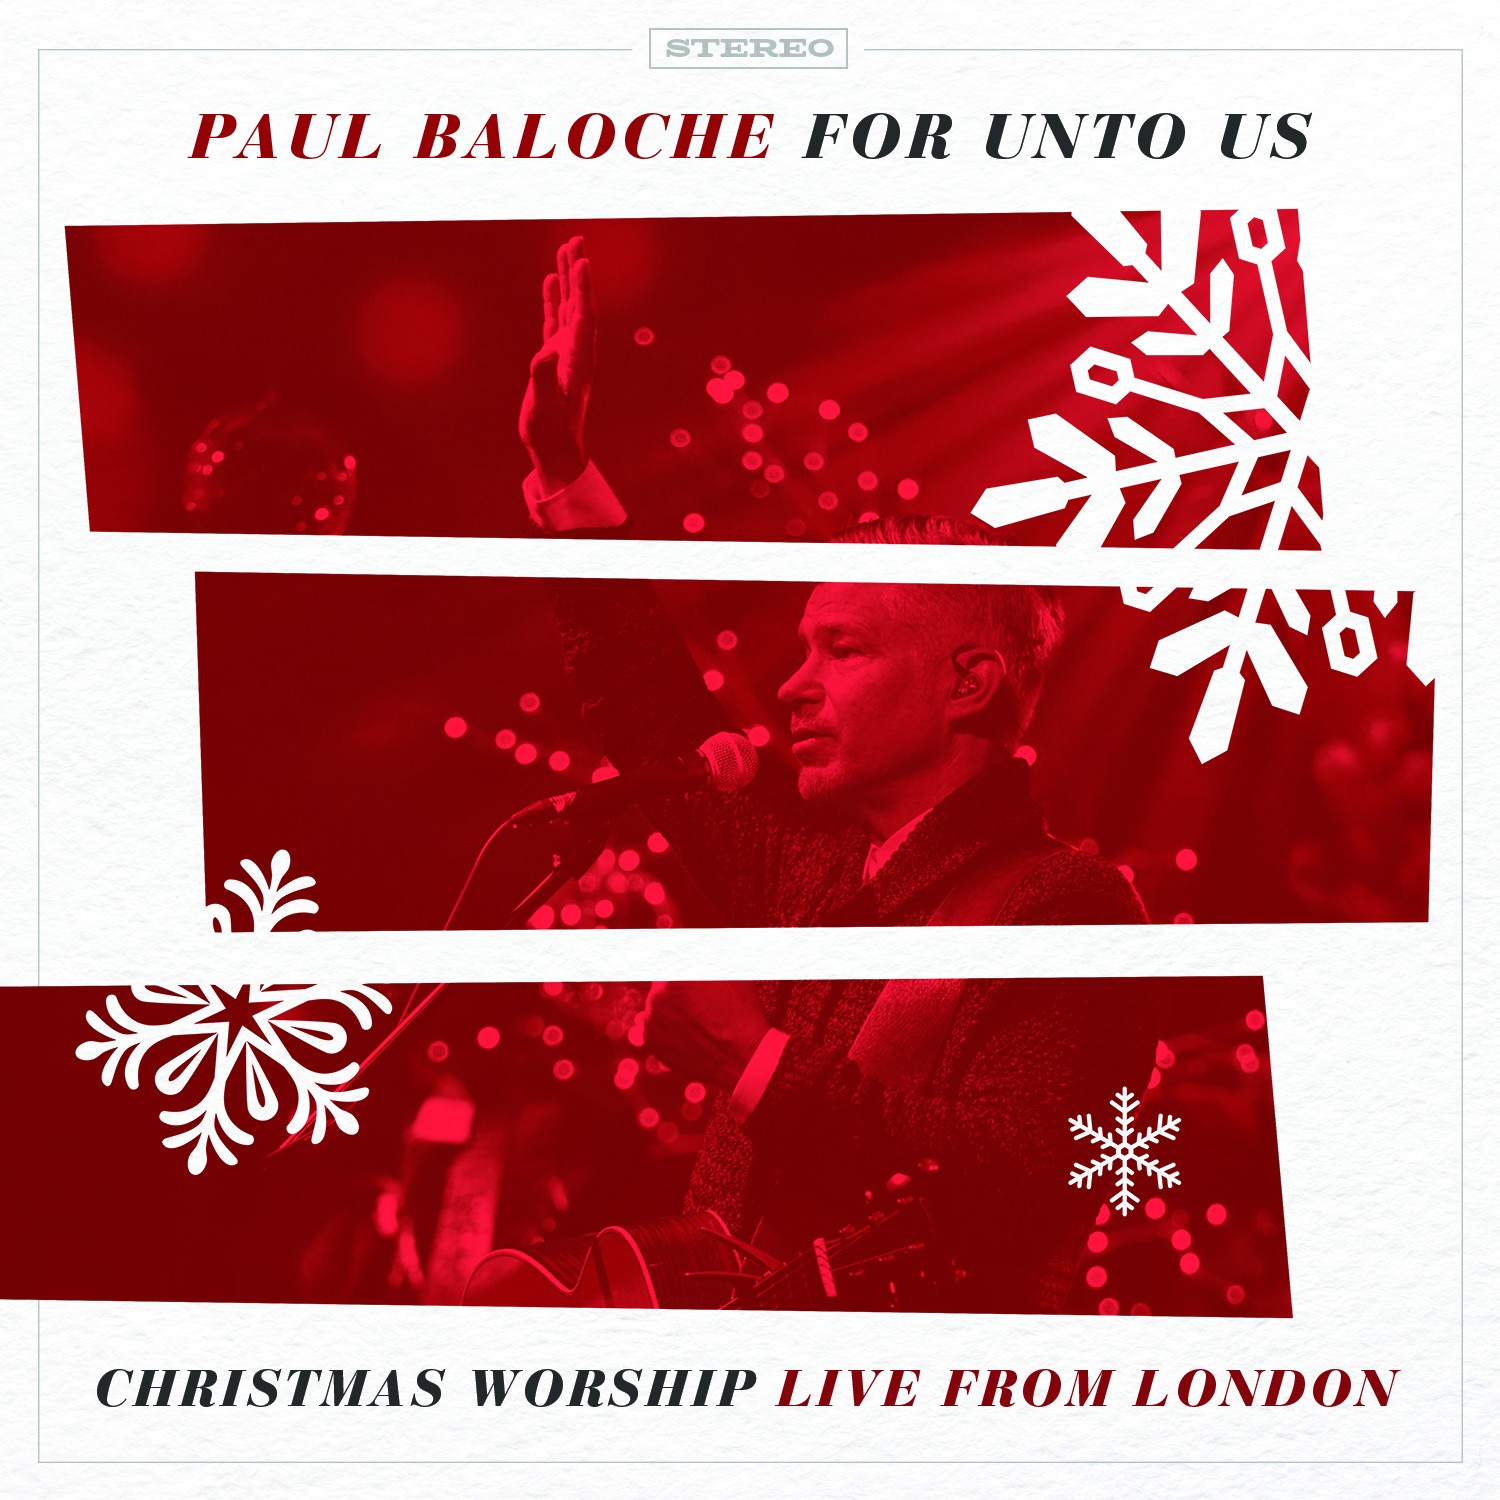 For Unto Us: Christmas Worship Live From London